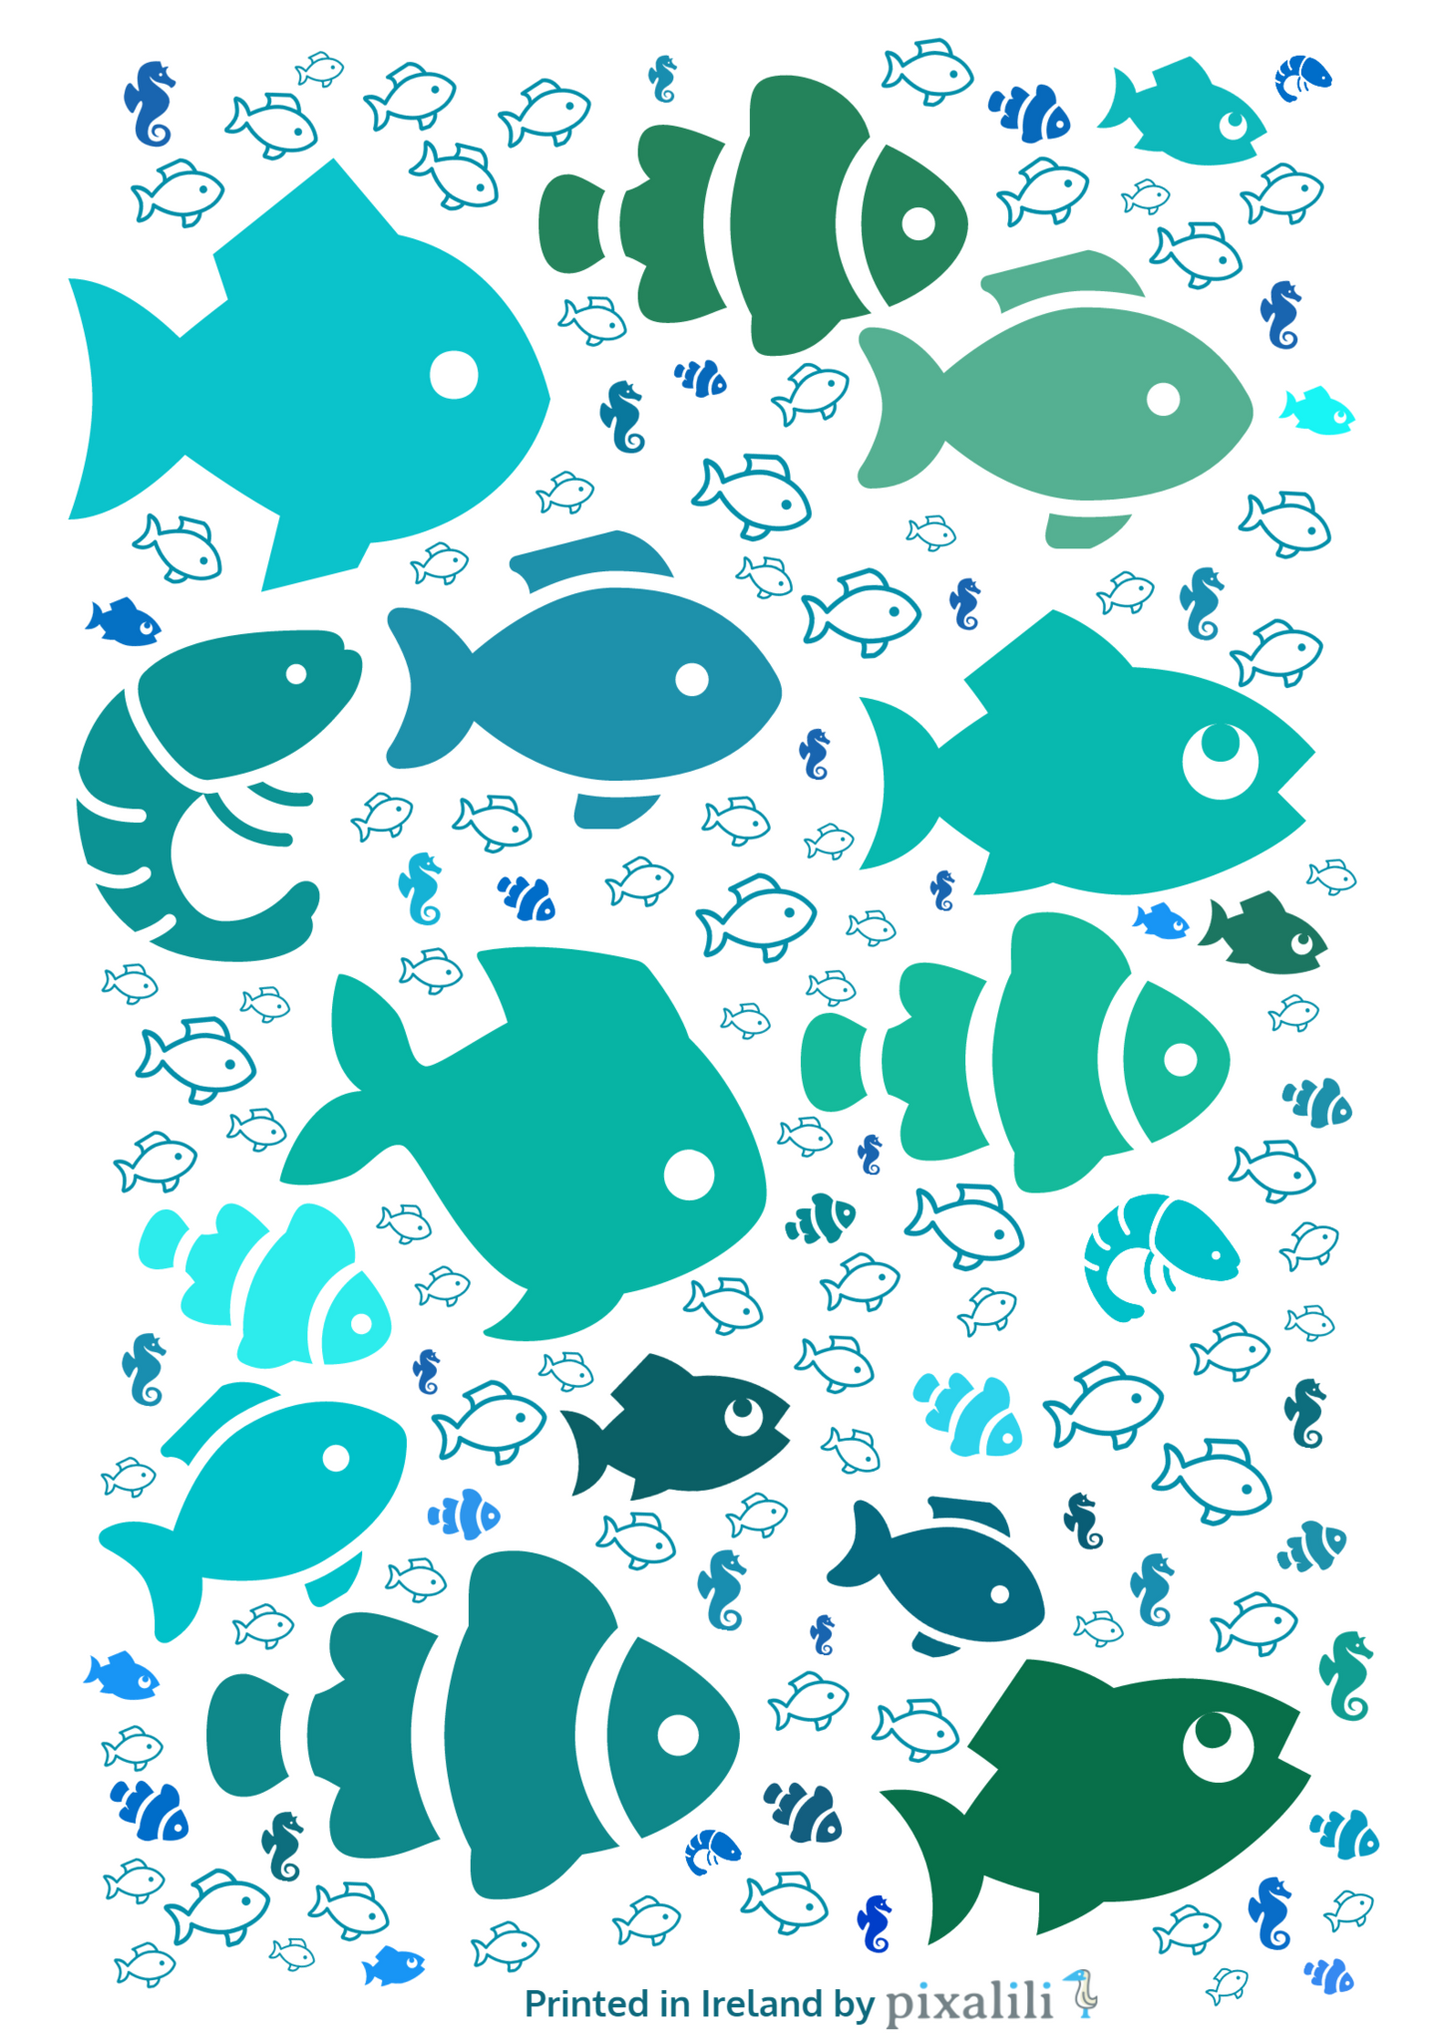 A fishy tale in green and blue